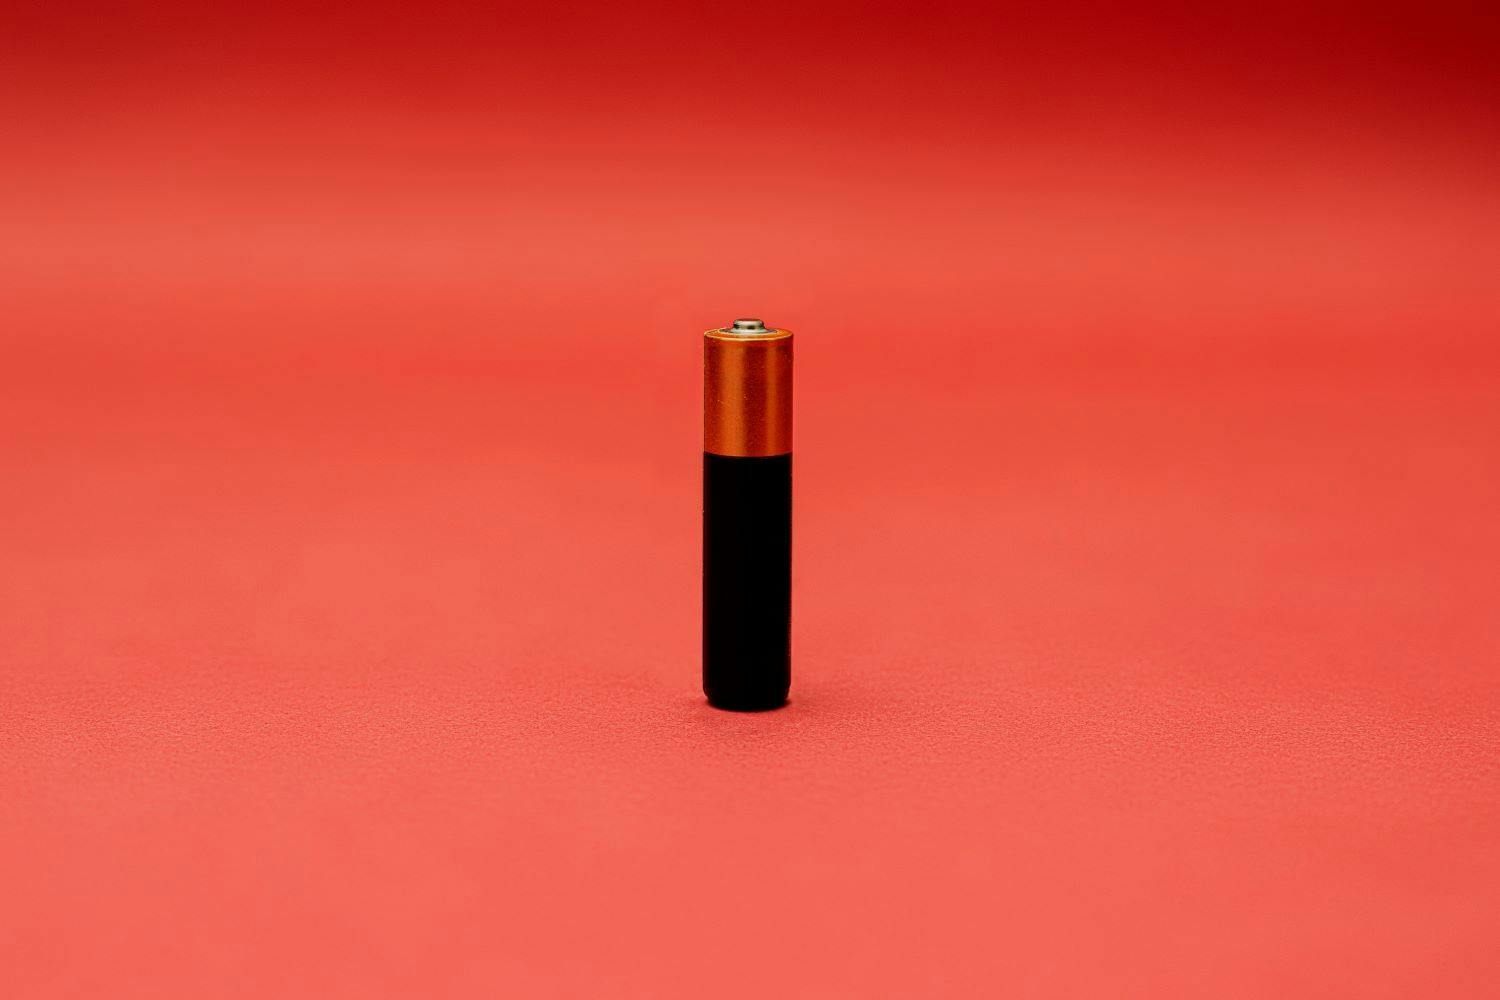 Image of AA battery on red background